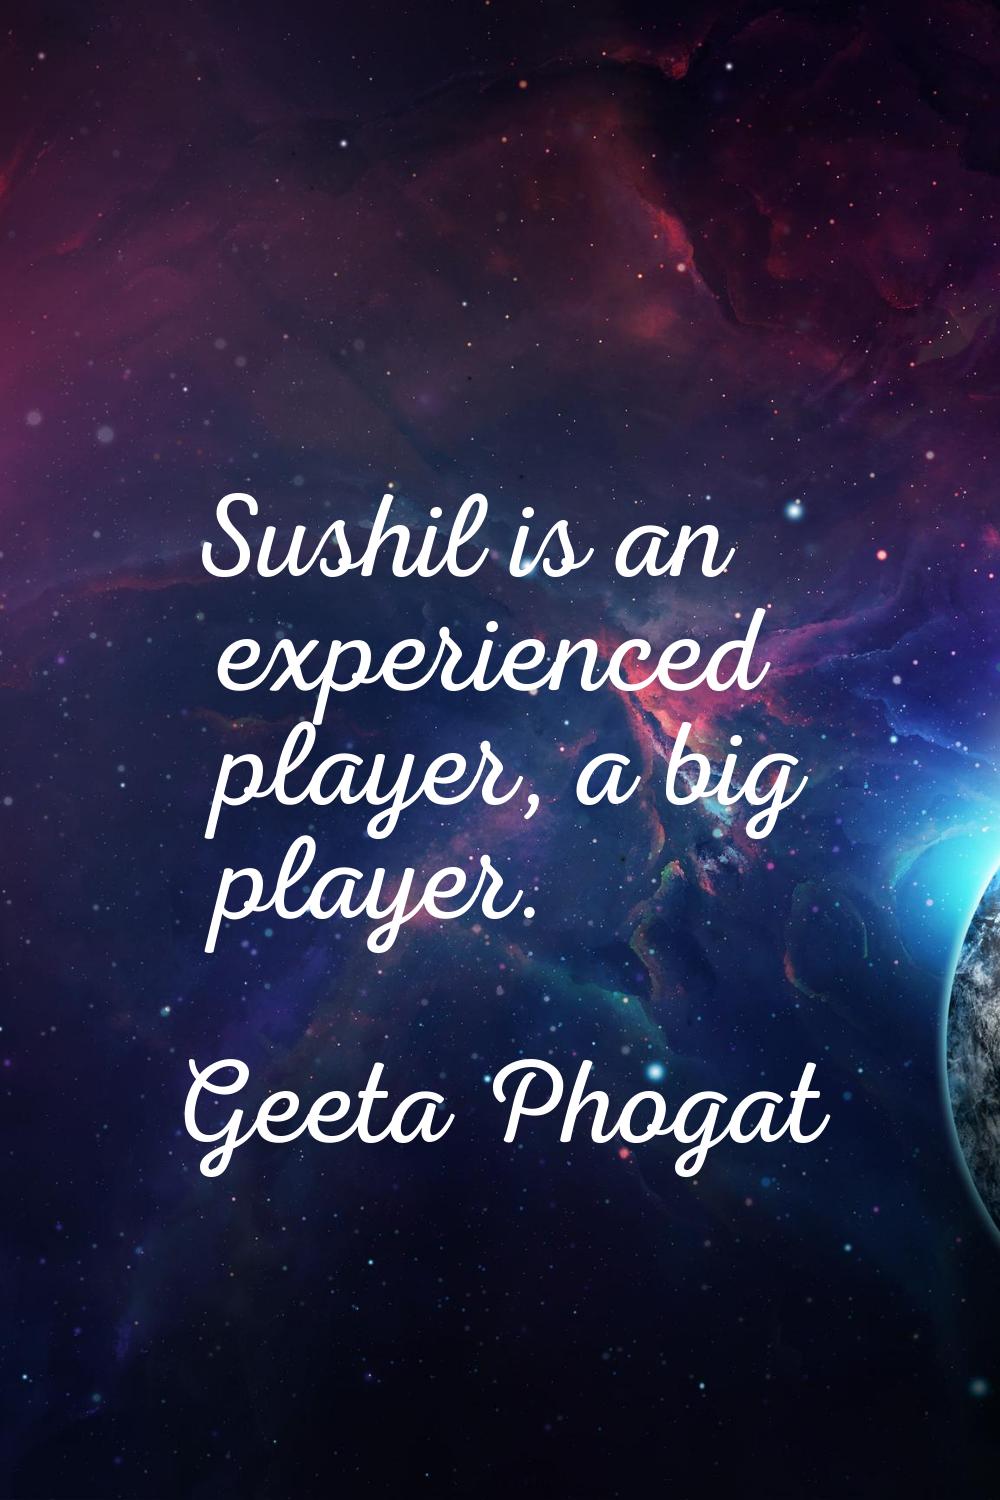 Sushil is an experienced player, a big player.